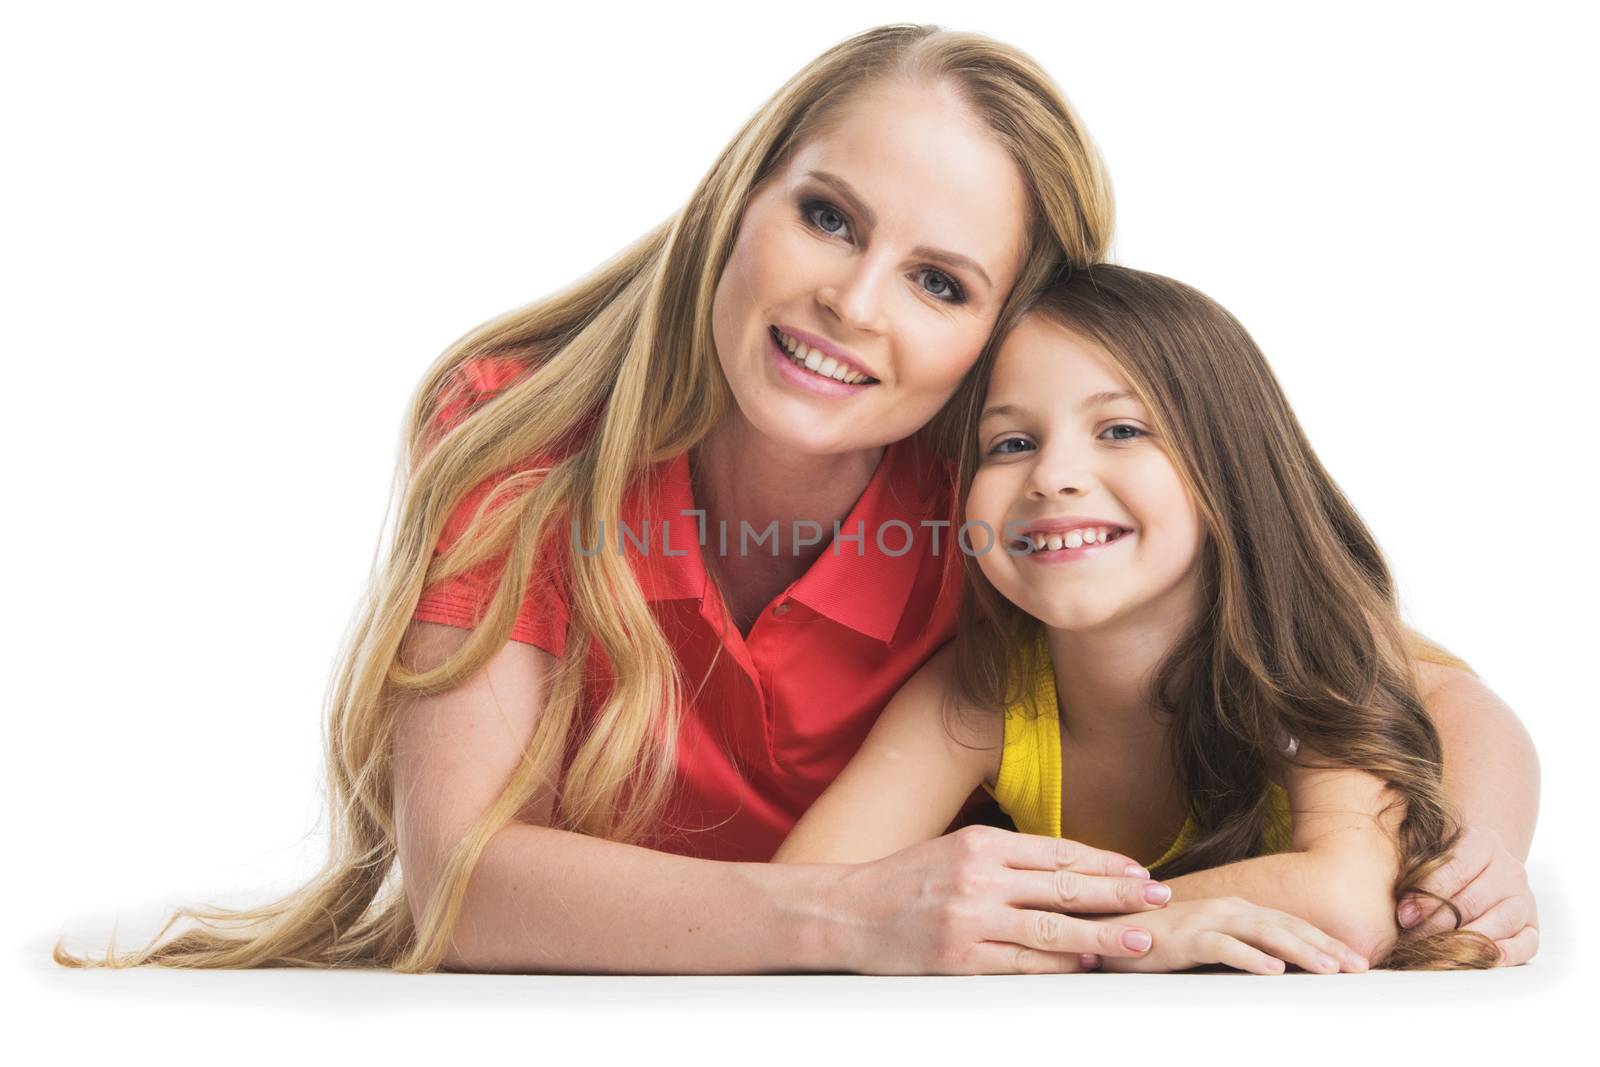 Happy smiling mother and daughter laying on floor, studio portrait isolated on white background